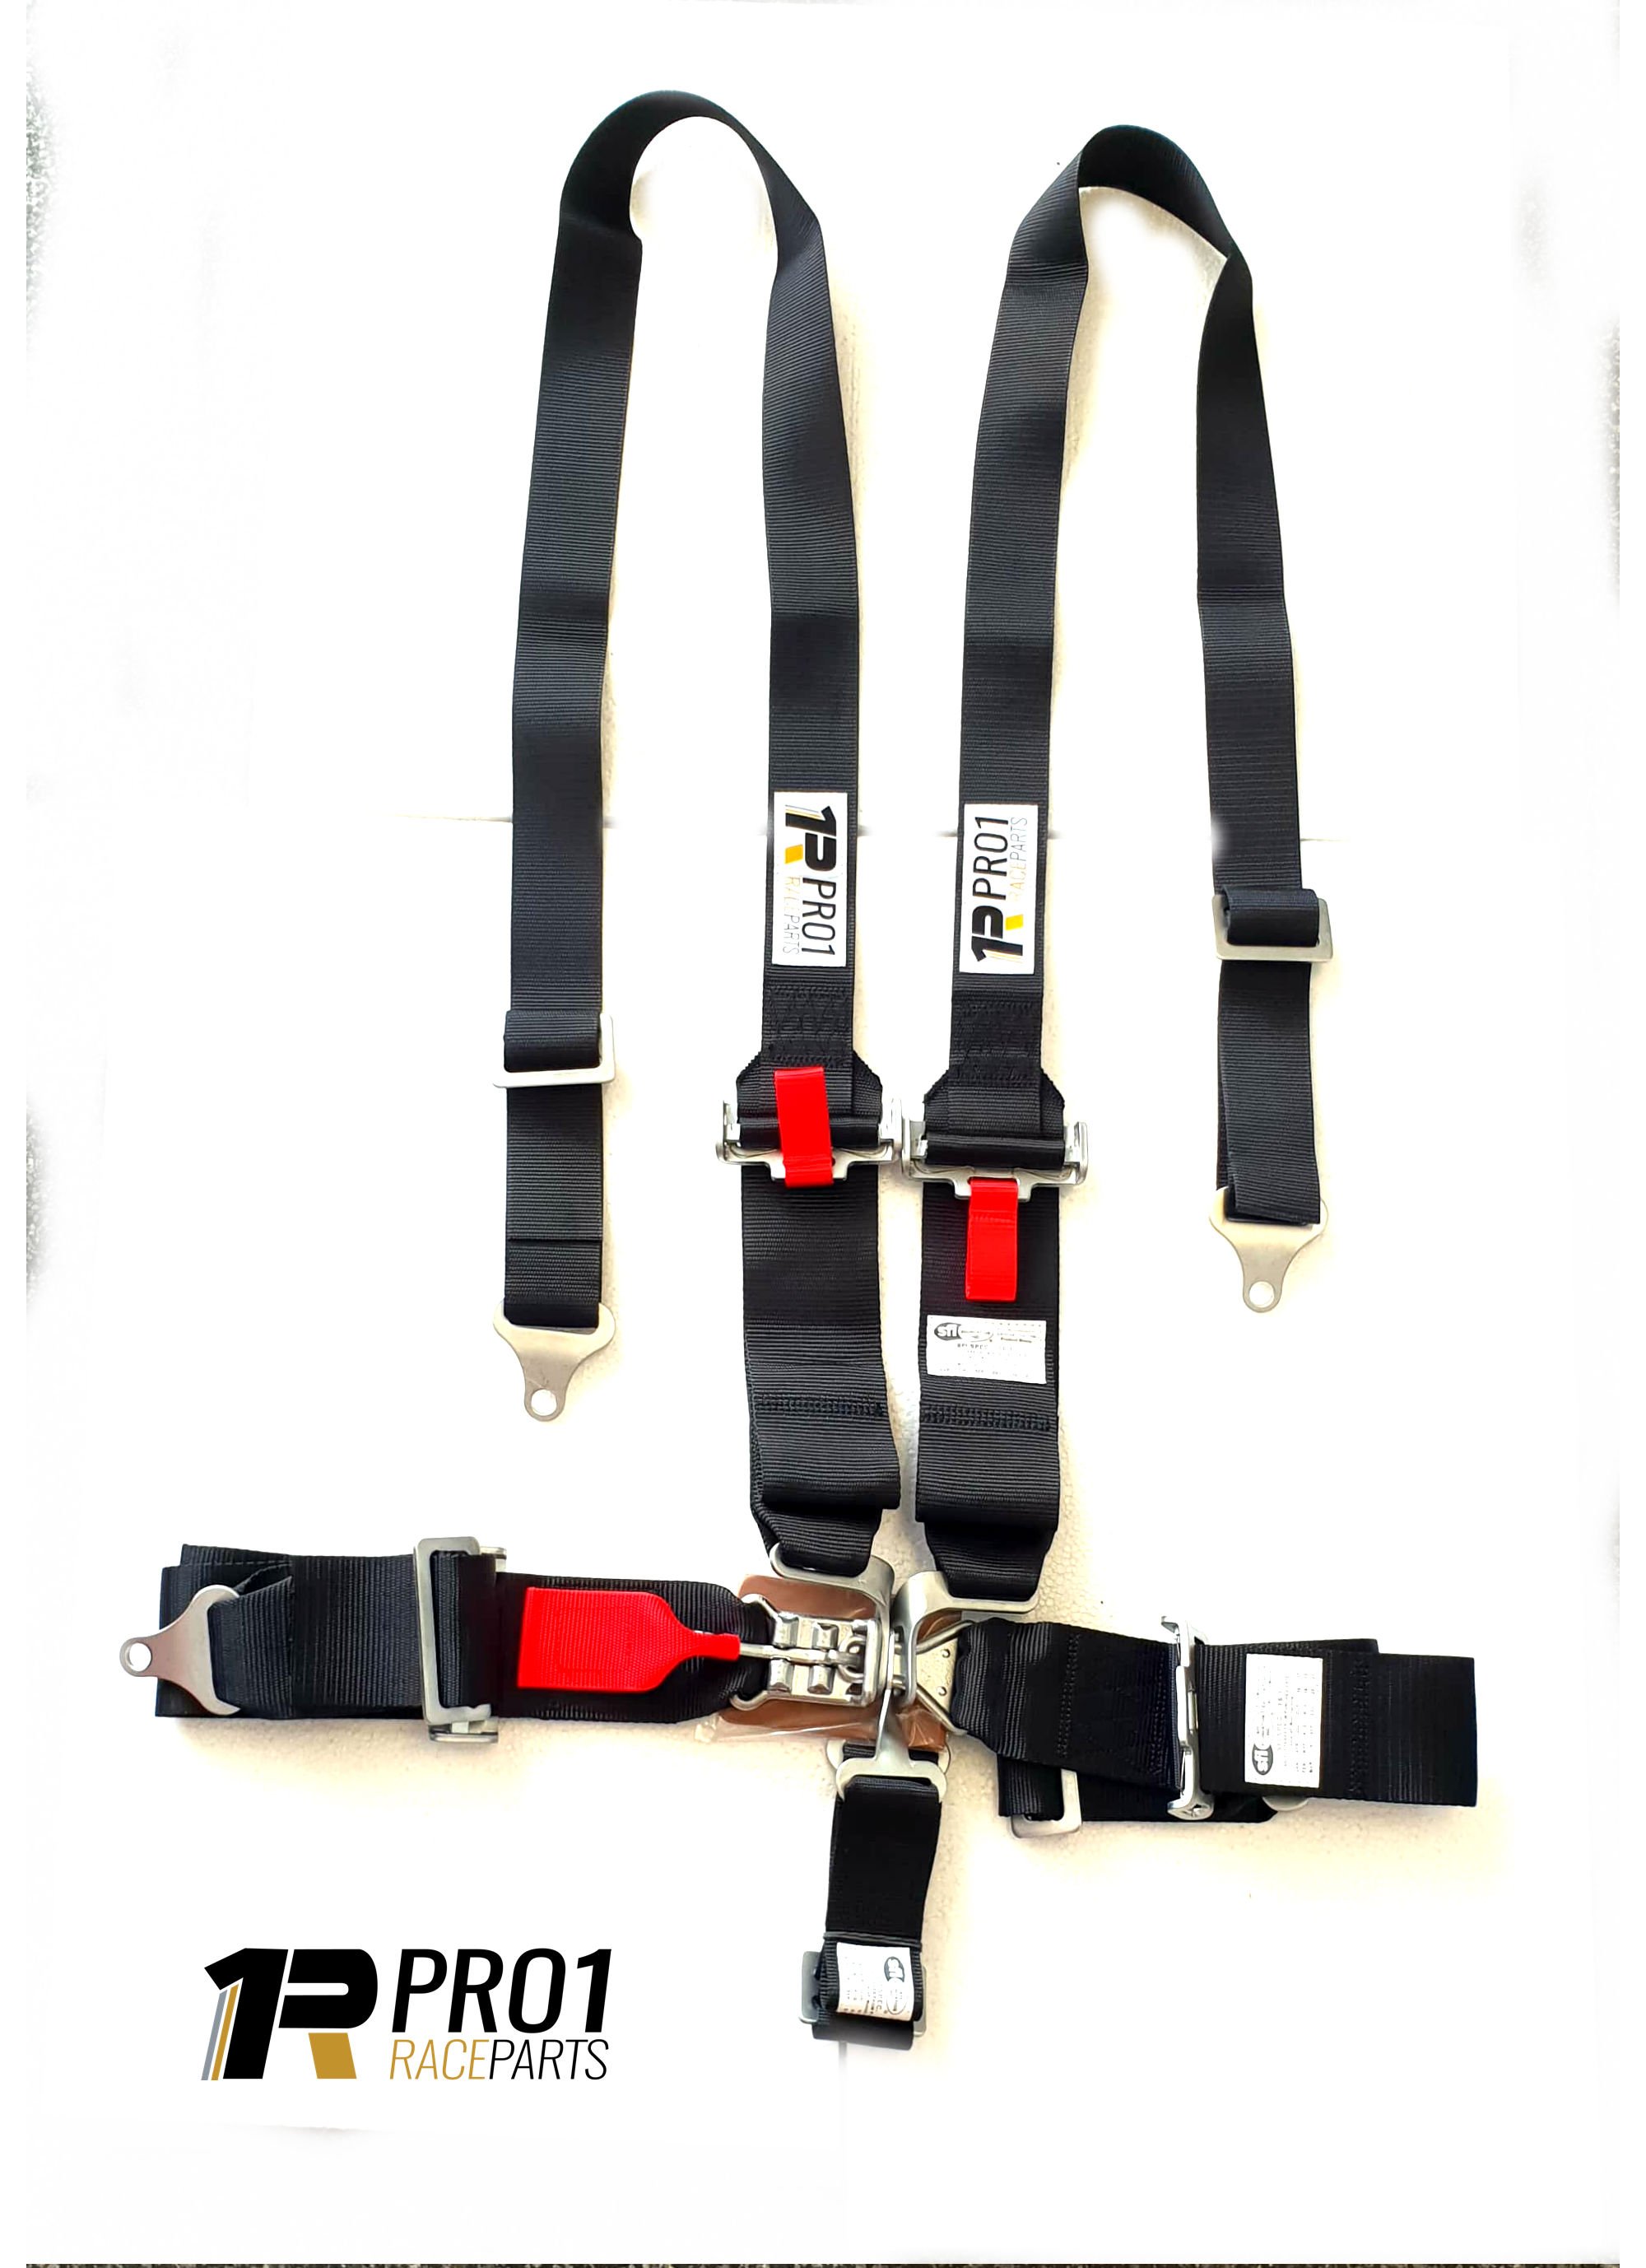 x2 P151100 5 Point 3 Harness w Override Clip Black 2 PACK Pro Armor A115230 